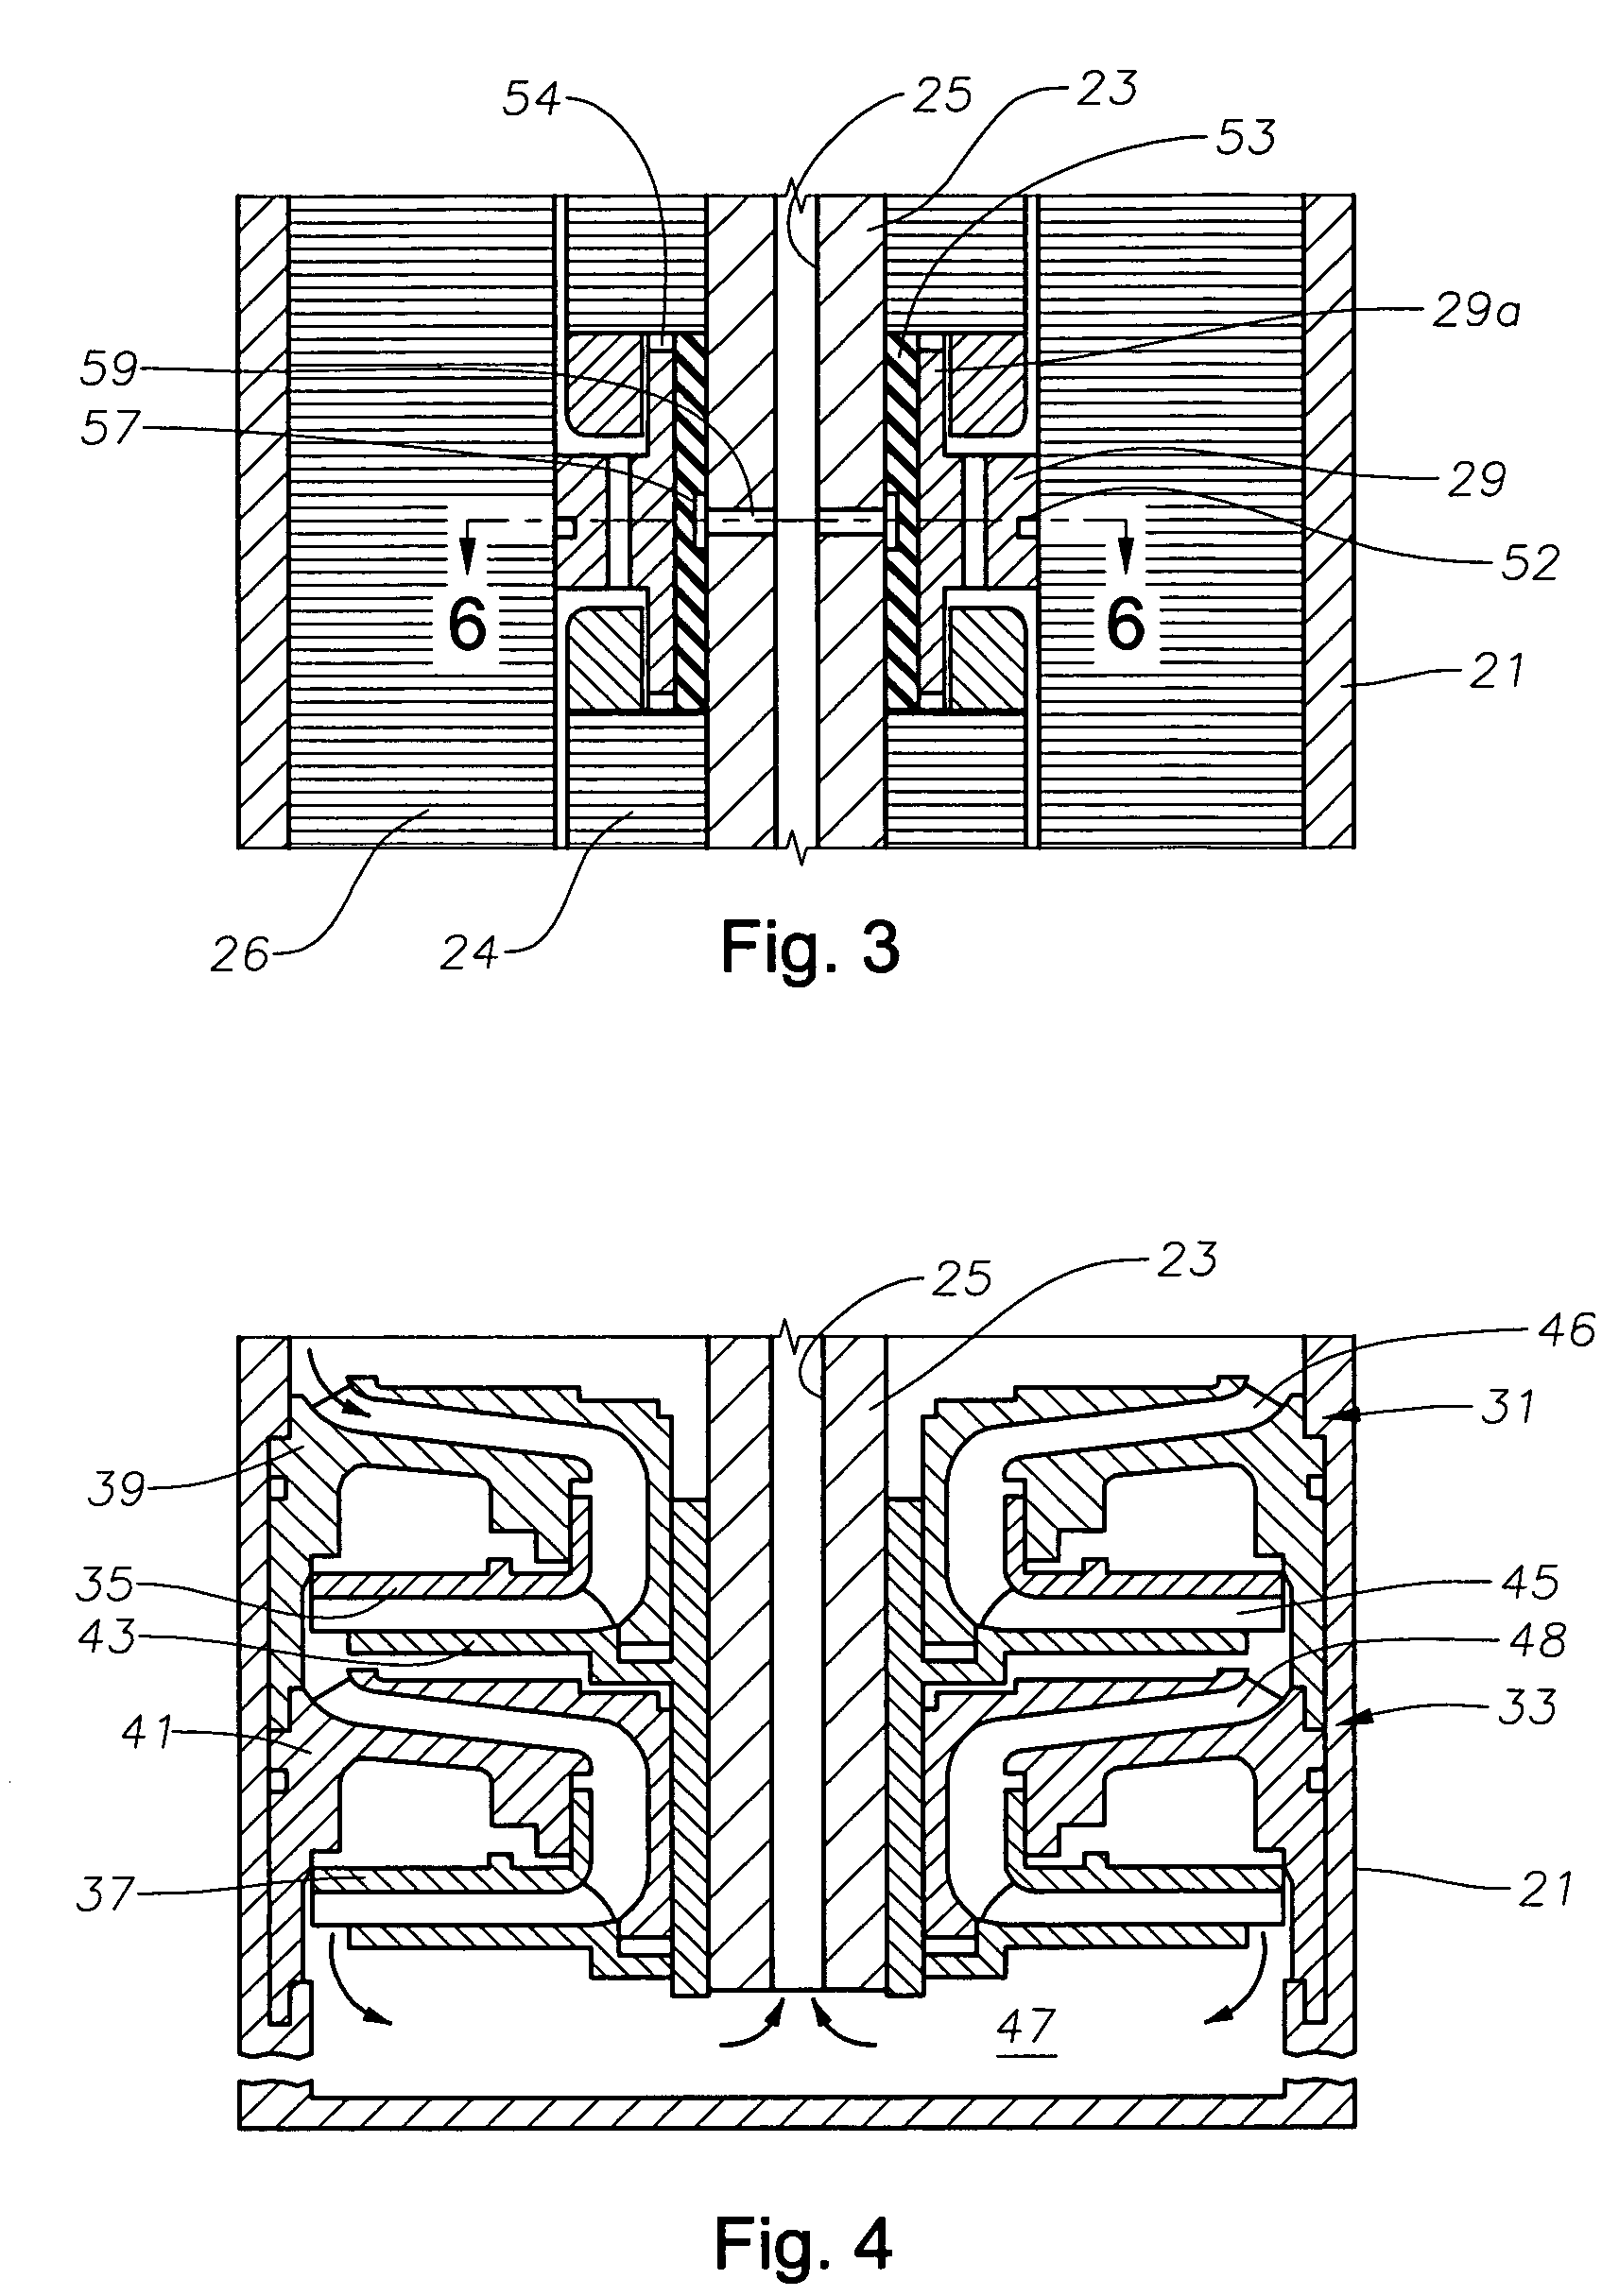 Pressurized bearing system for submersible motor